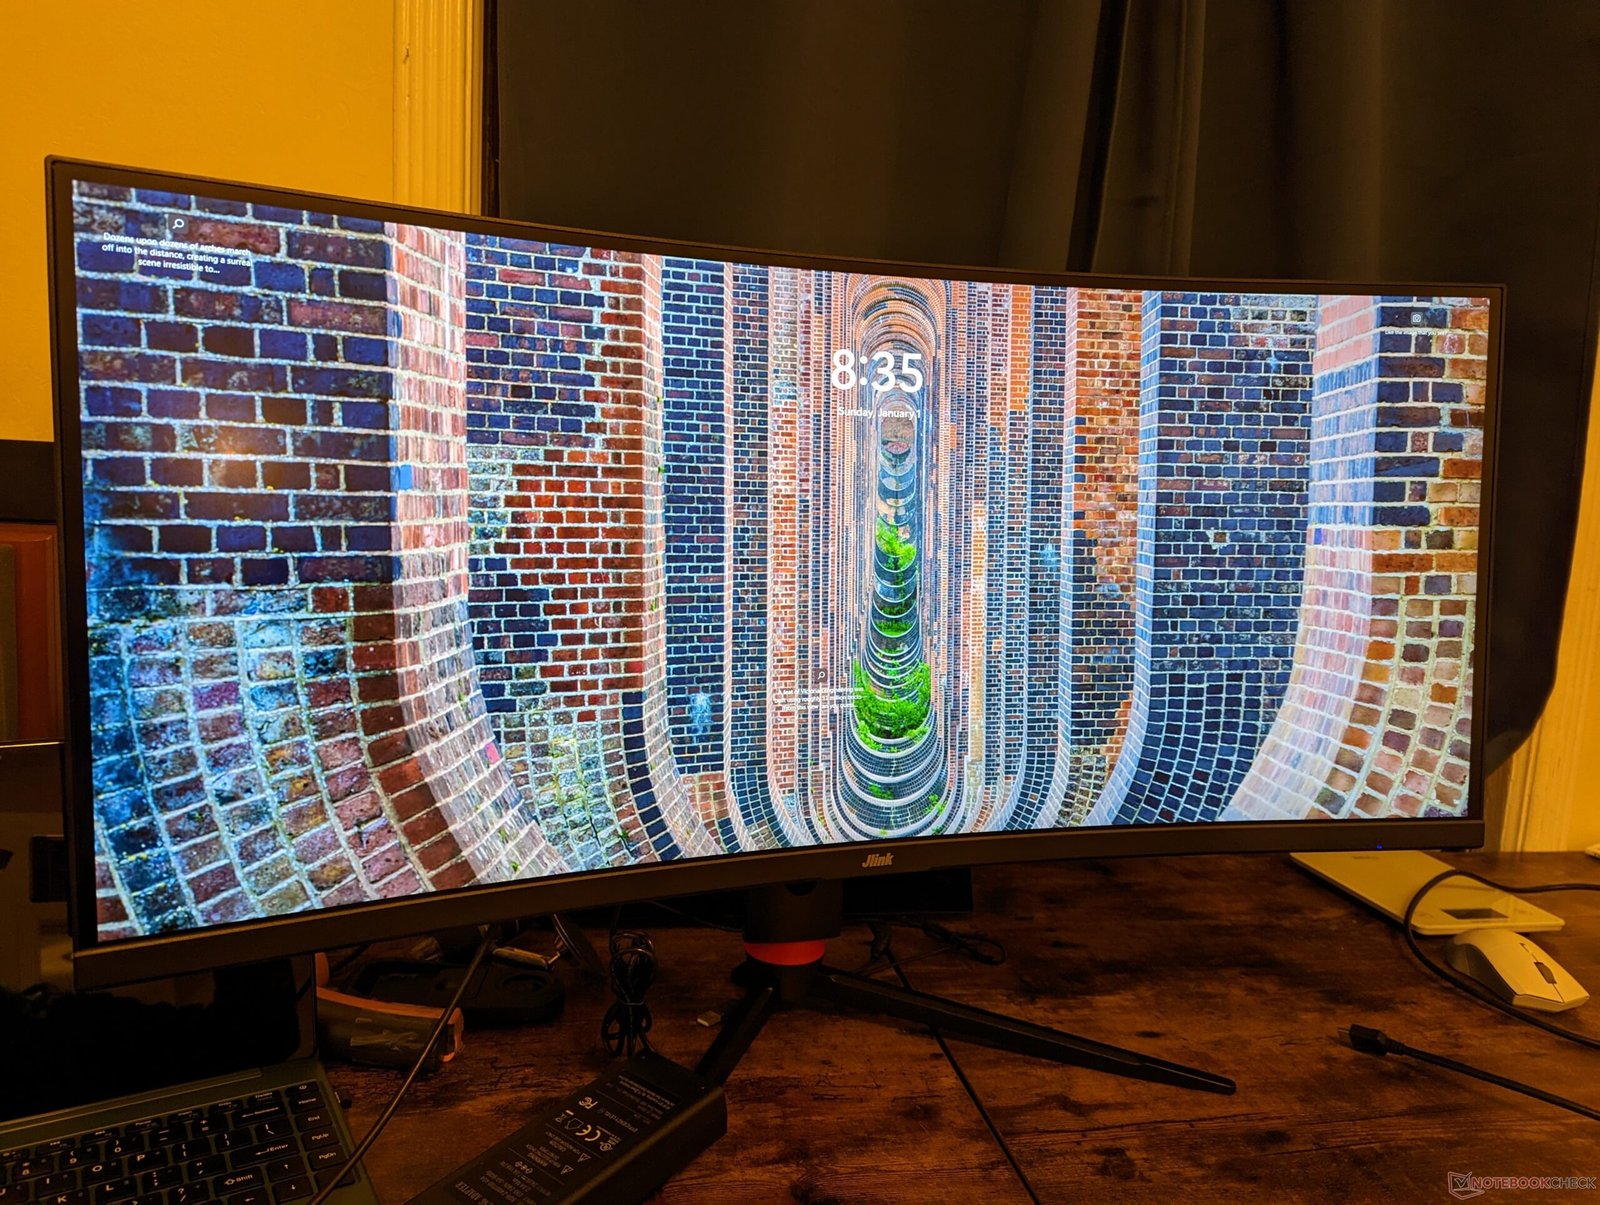 Curved Jlink 34-bound 144 Hz video display with KVM, G-Sync, and sRGB colors on sale for US$450